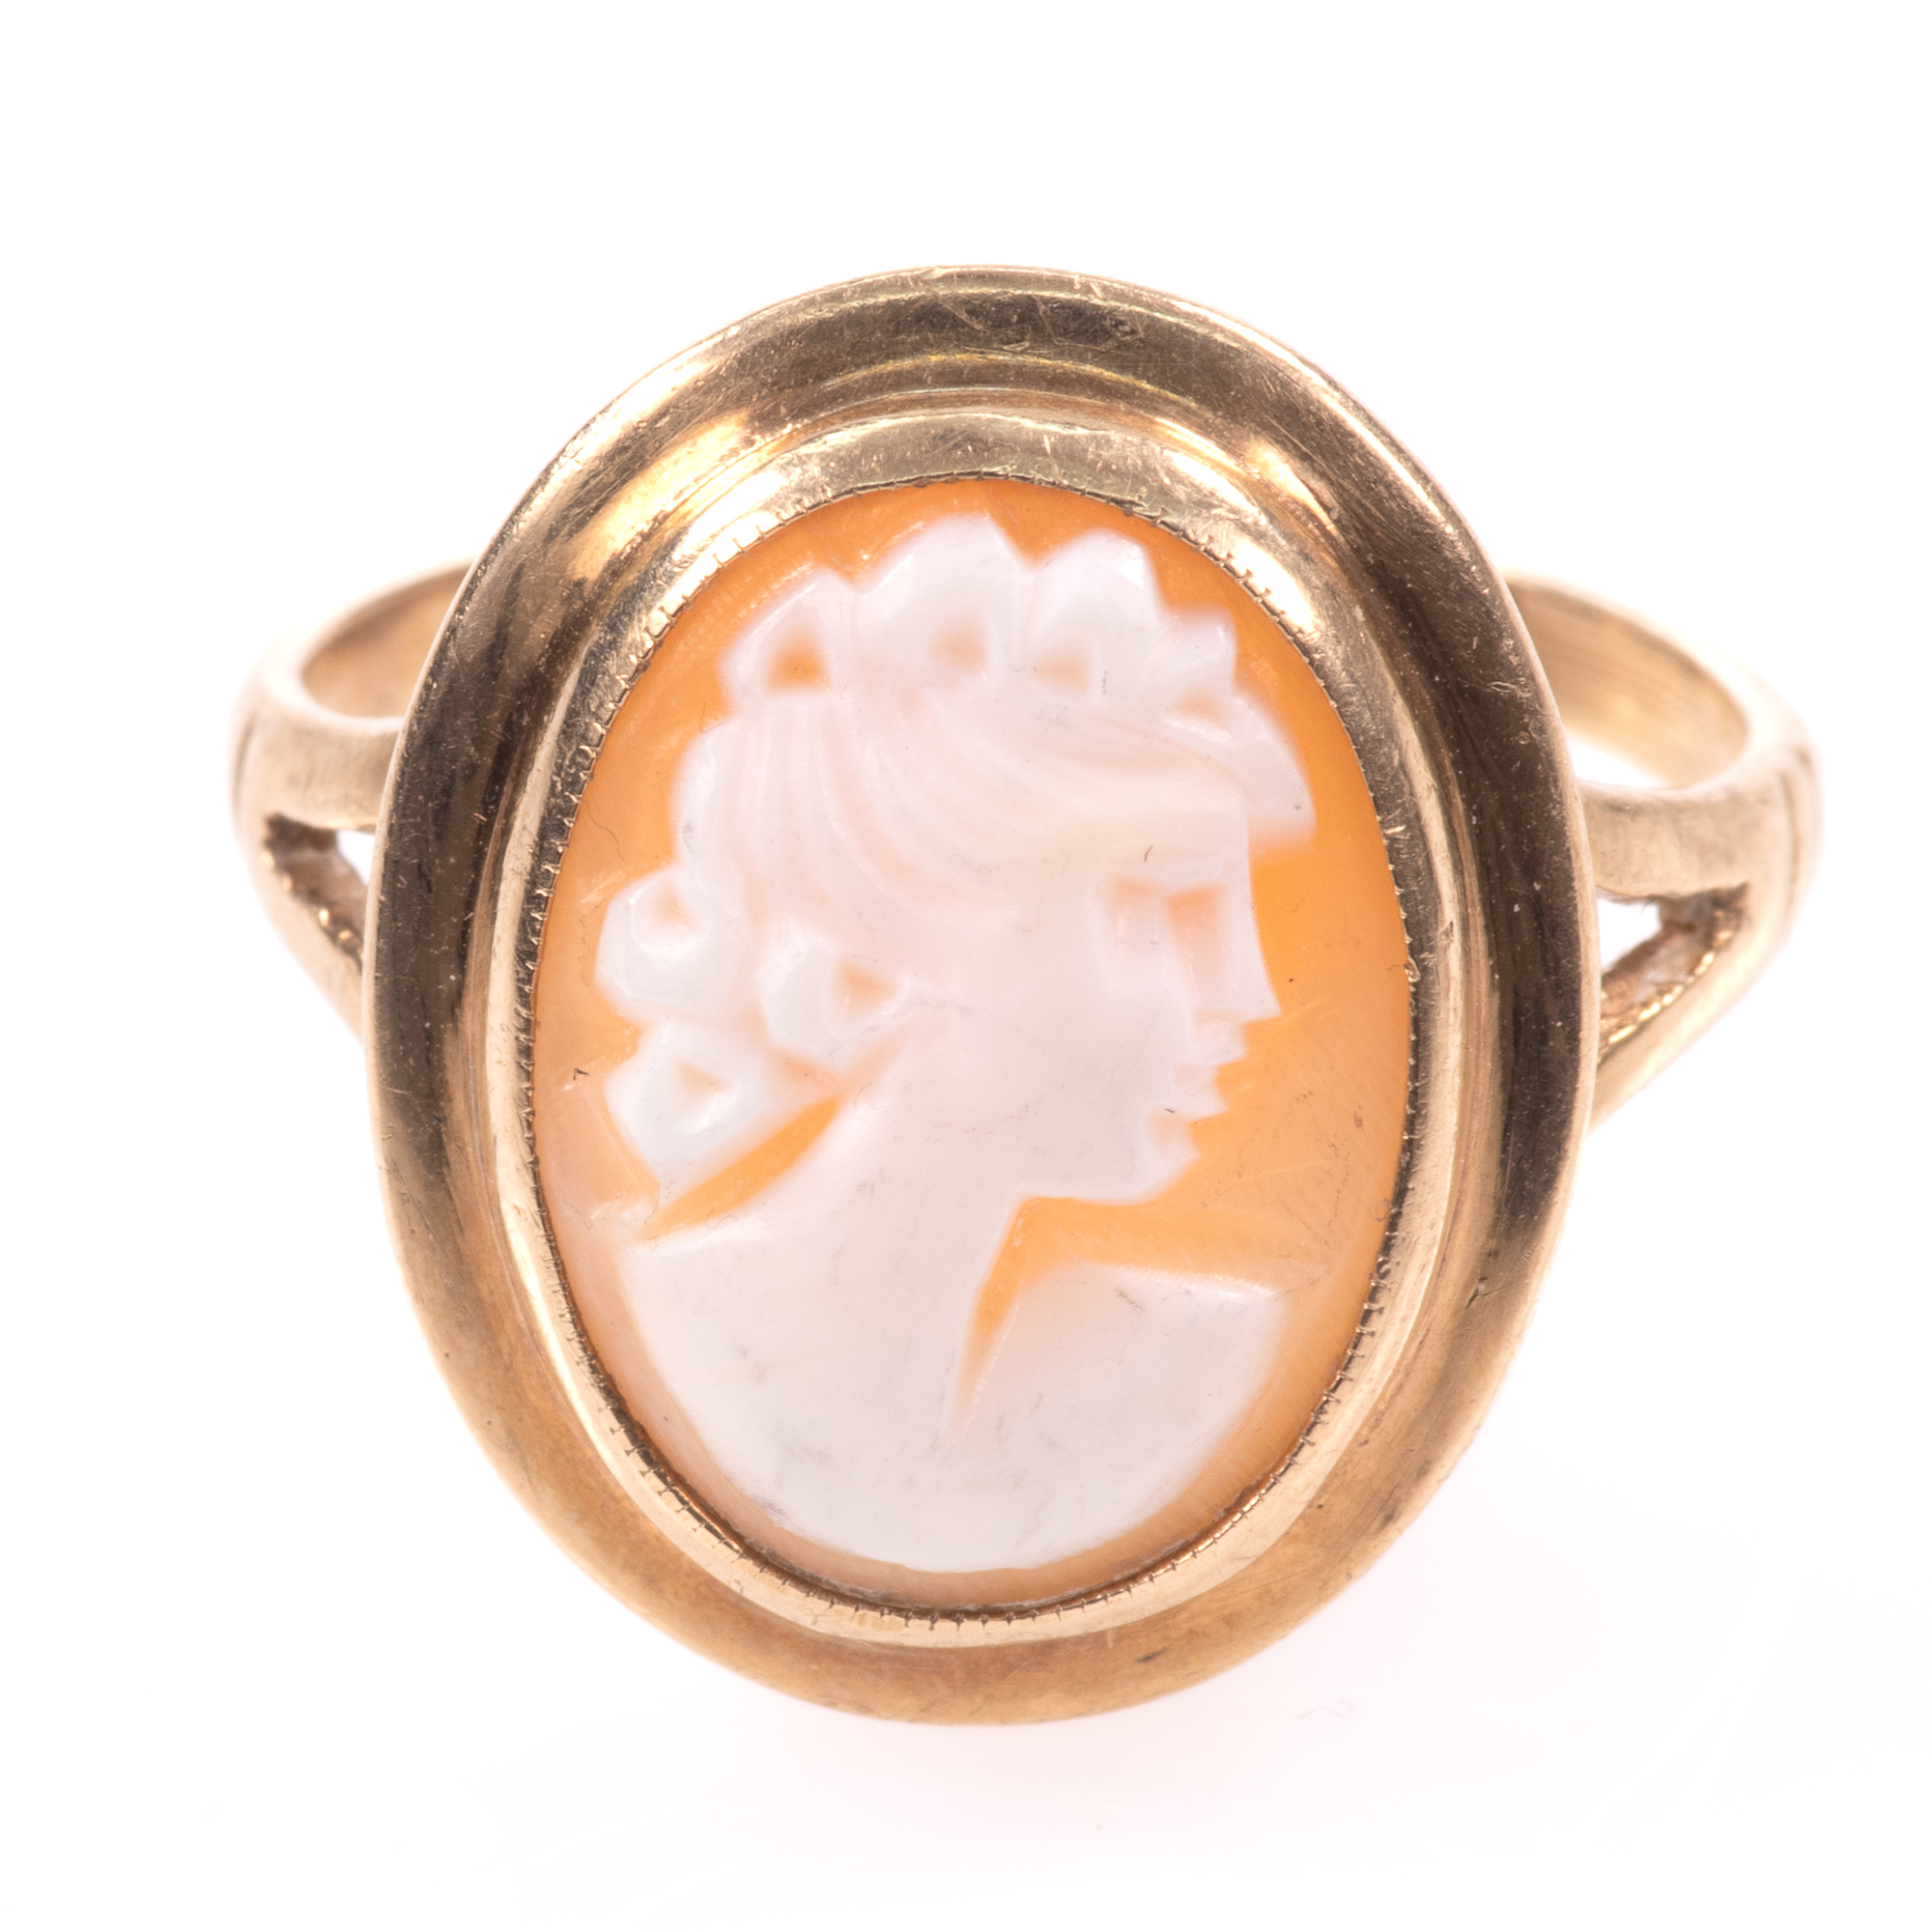 9ct Gold Classical Cameo Ring - Image 3 of 7